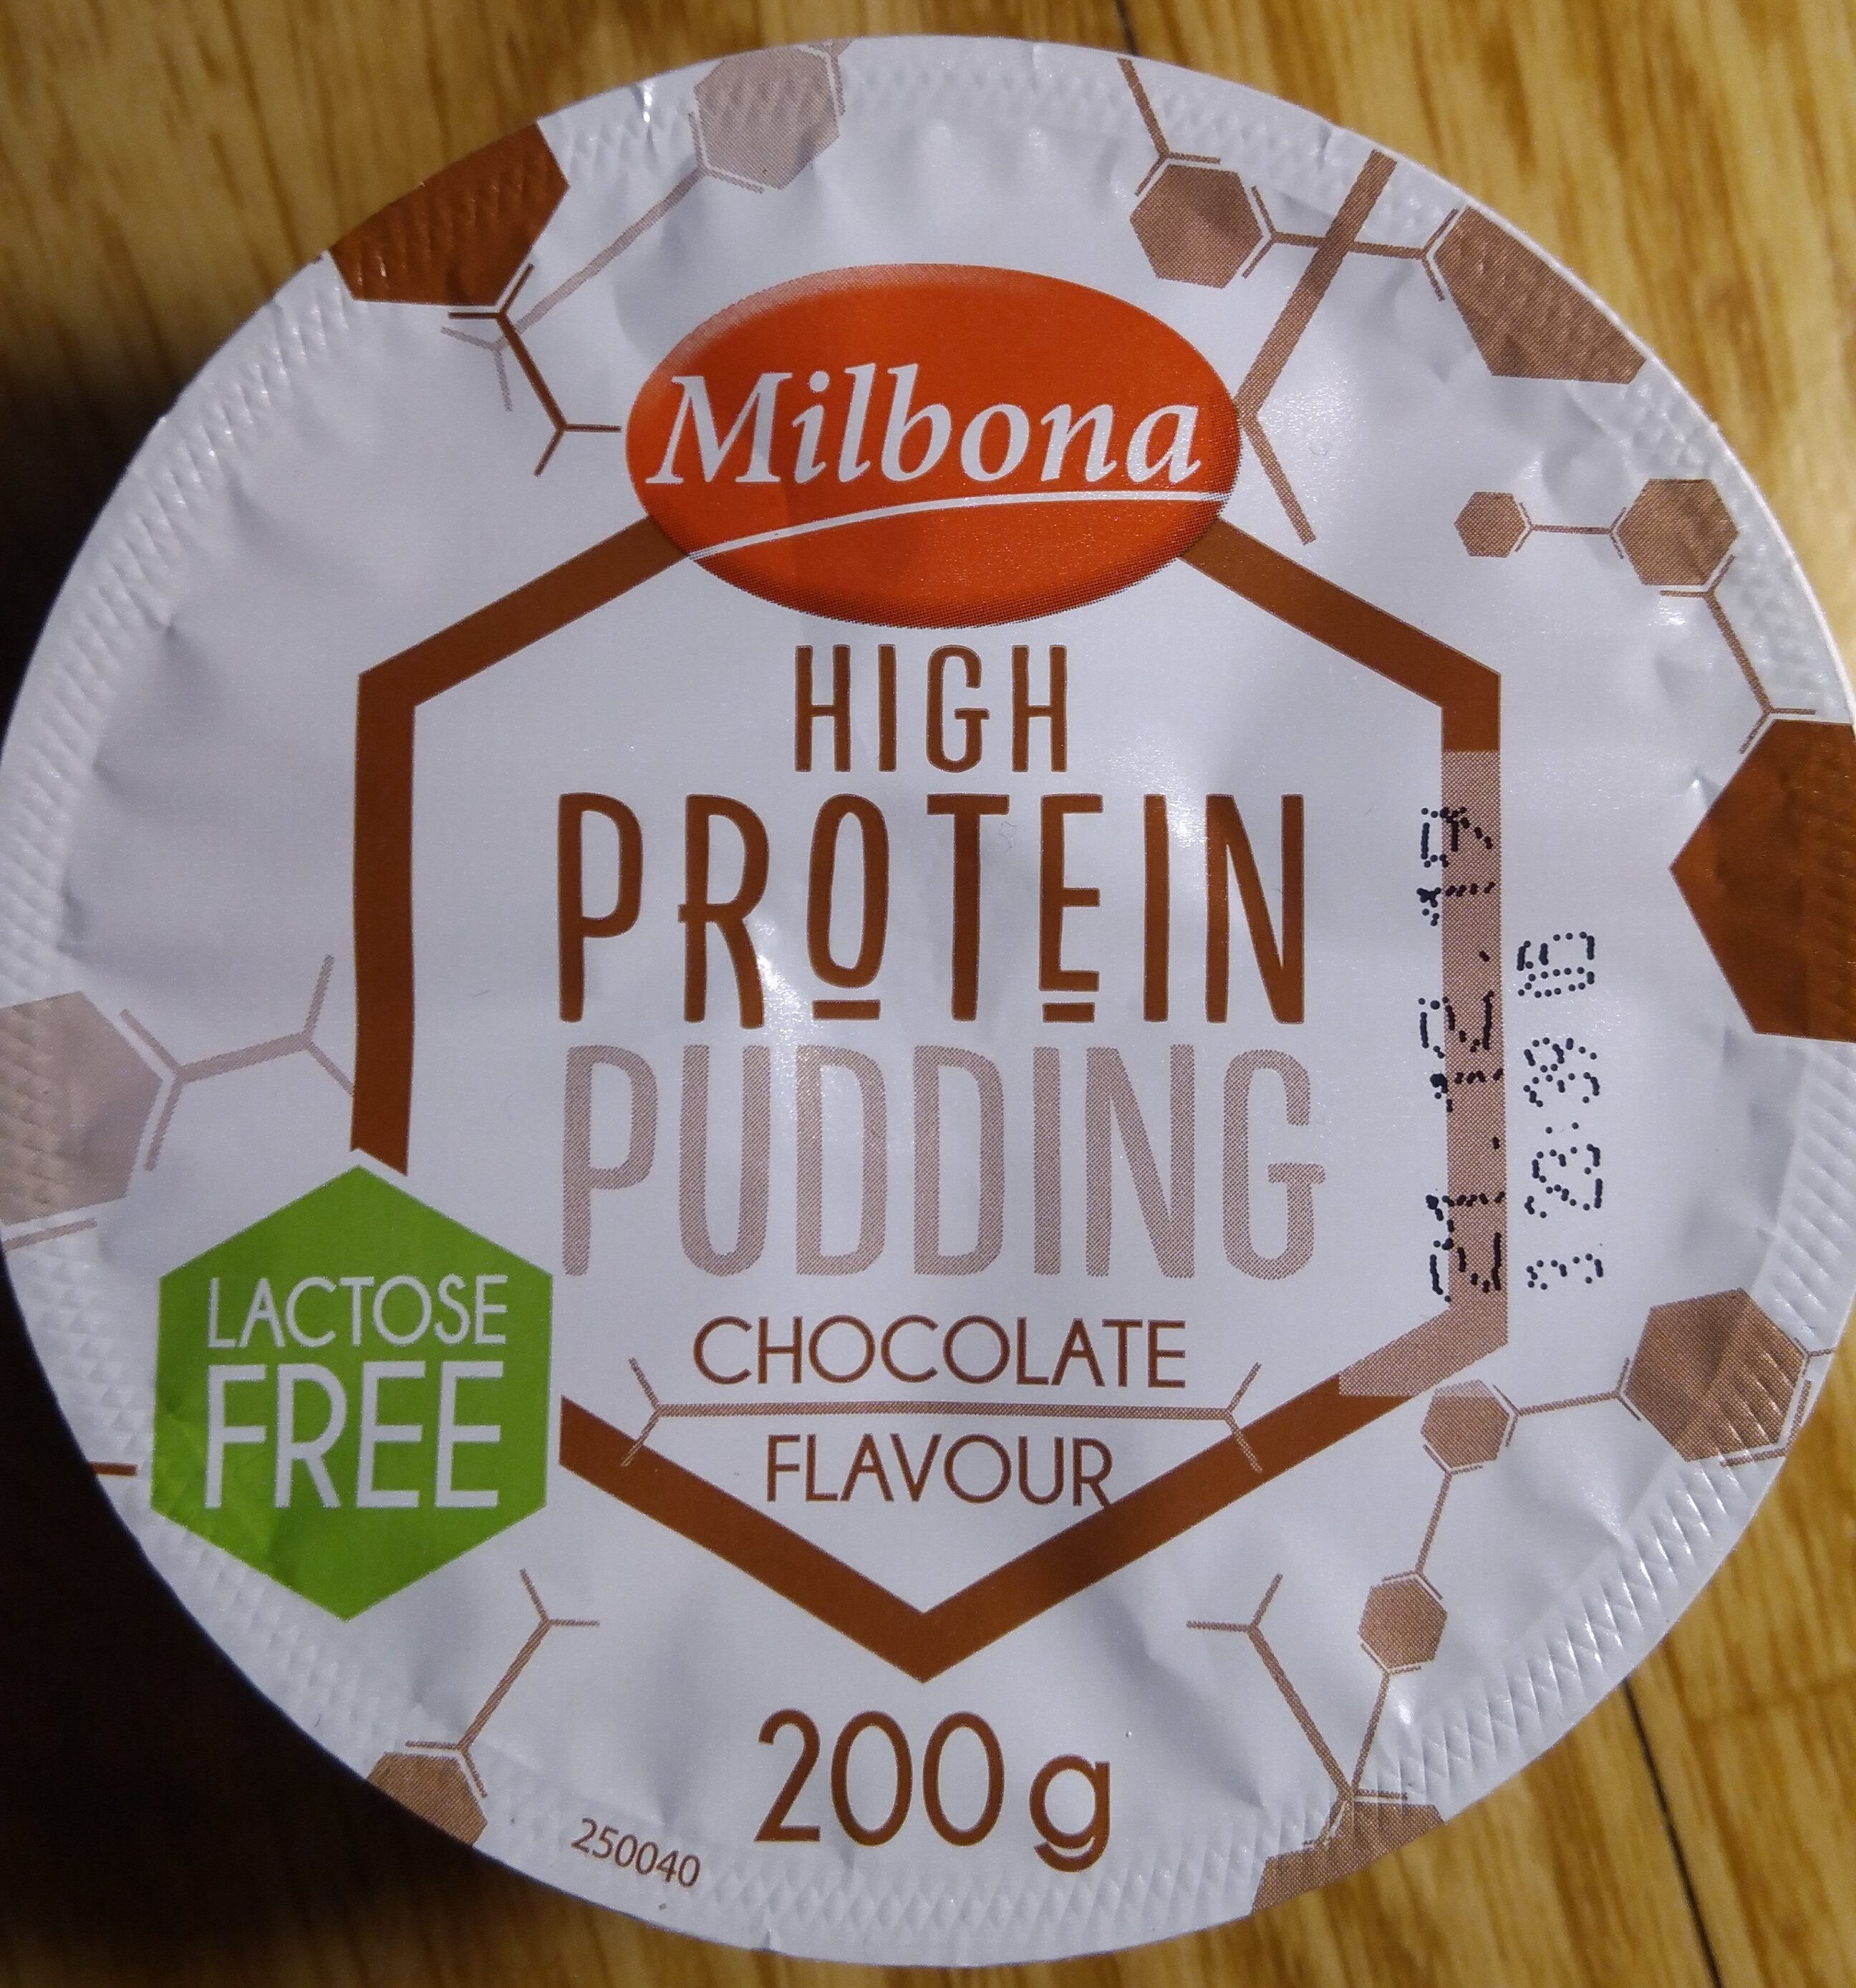 High Protein Pudding Chocolate Flavour - Tuote - fi